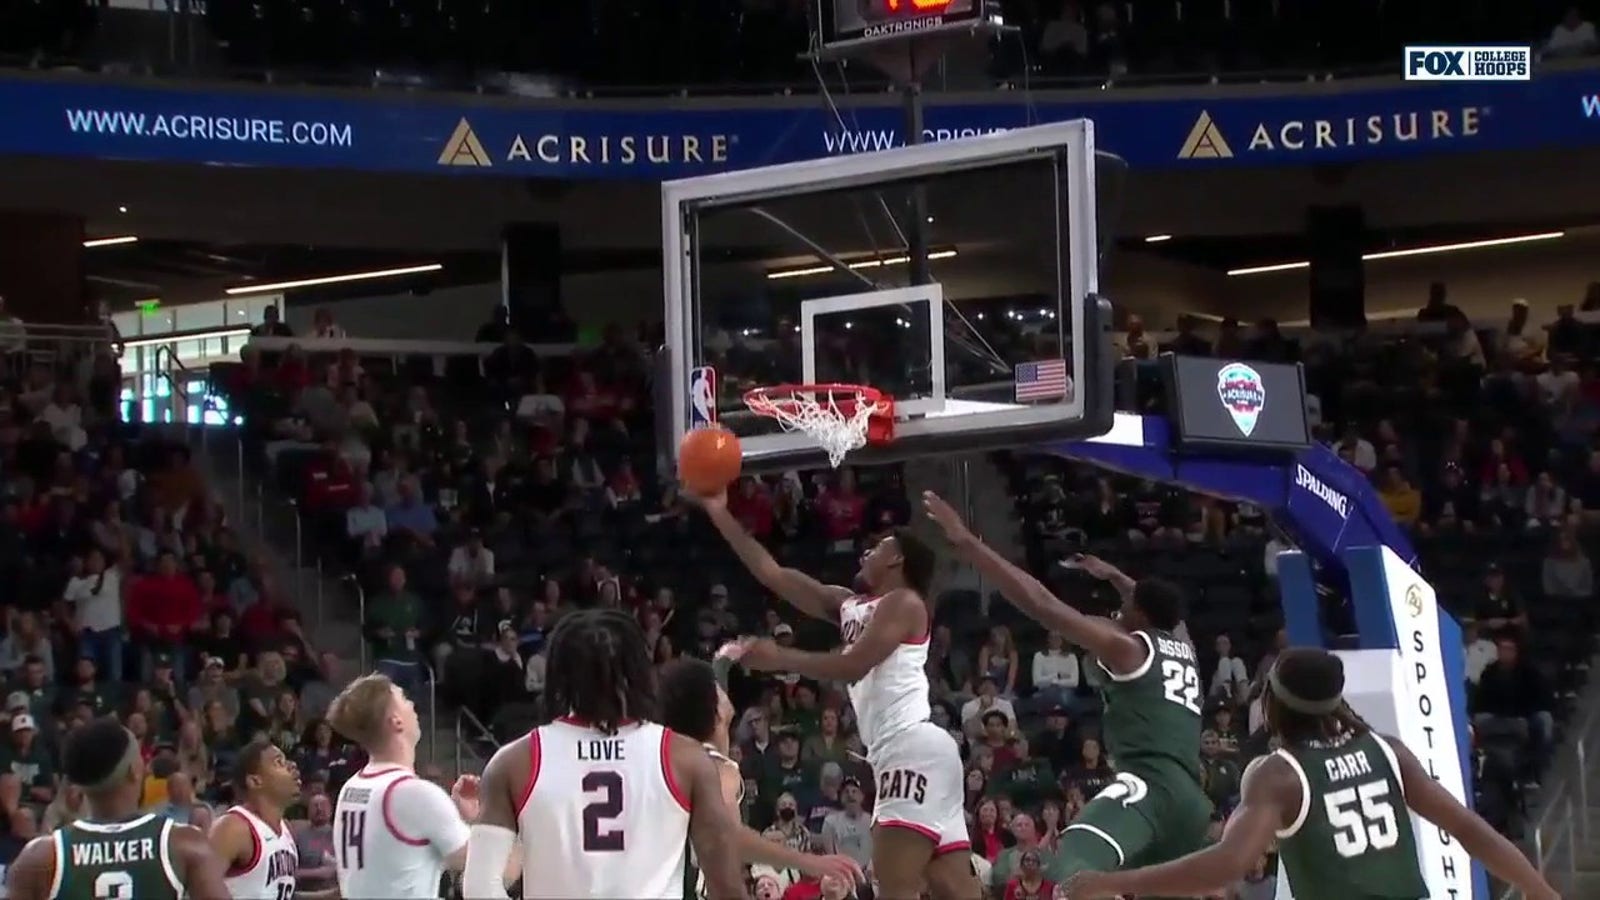 KJ Lewis makes an acrobatic finish at the rim to extend Arizona's lead over Michigan State